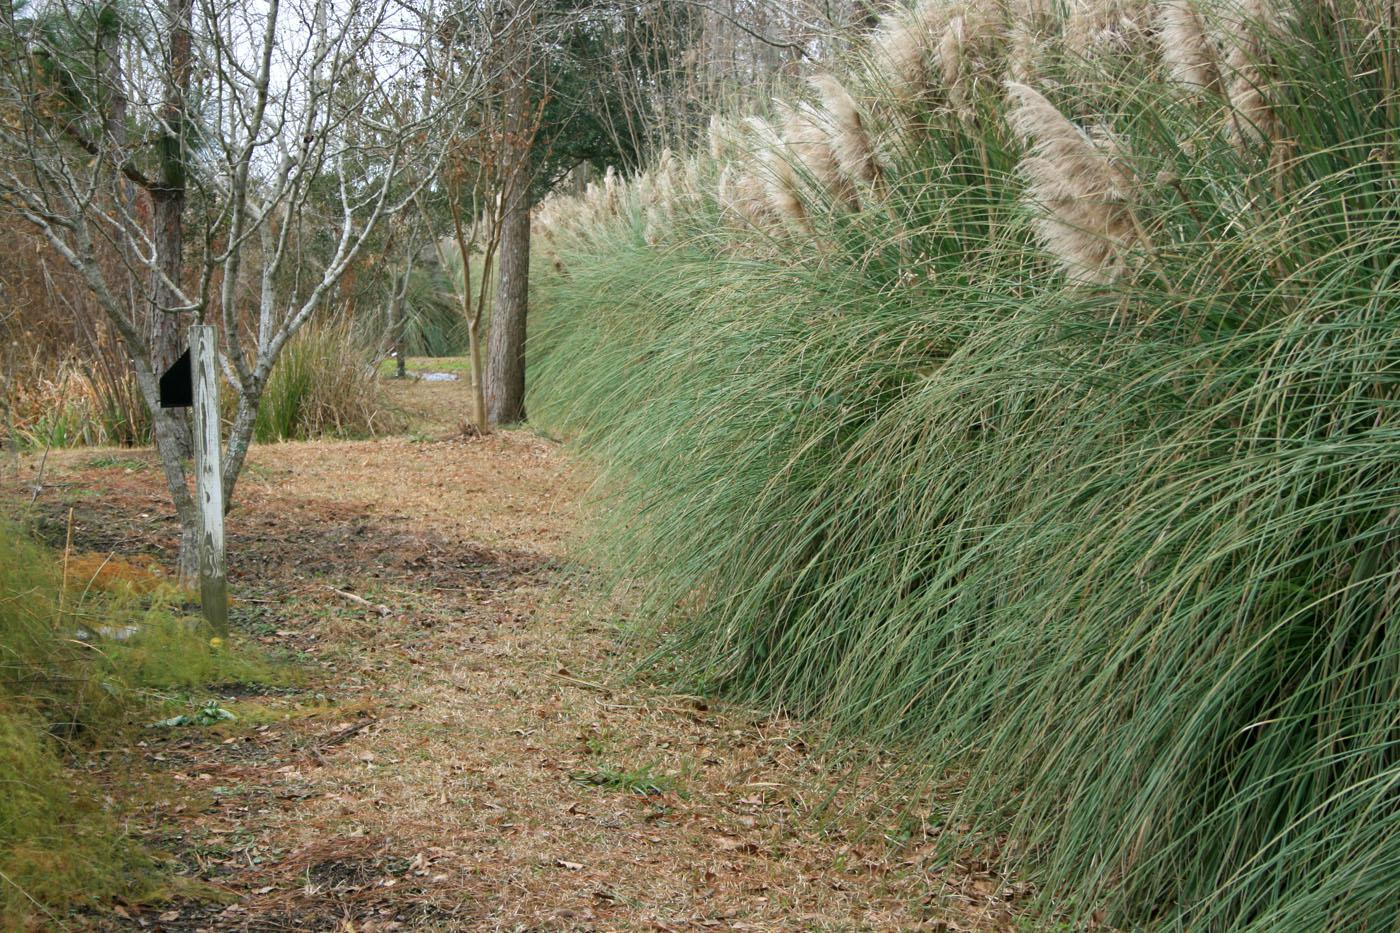 Living screens can block out unpleasant views in landscapes in ways not possible with fences or walls. This row of pampas grass is green and full, even in the winter. (Photo by Gary Bachman)